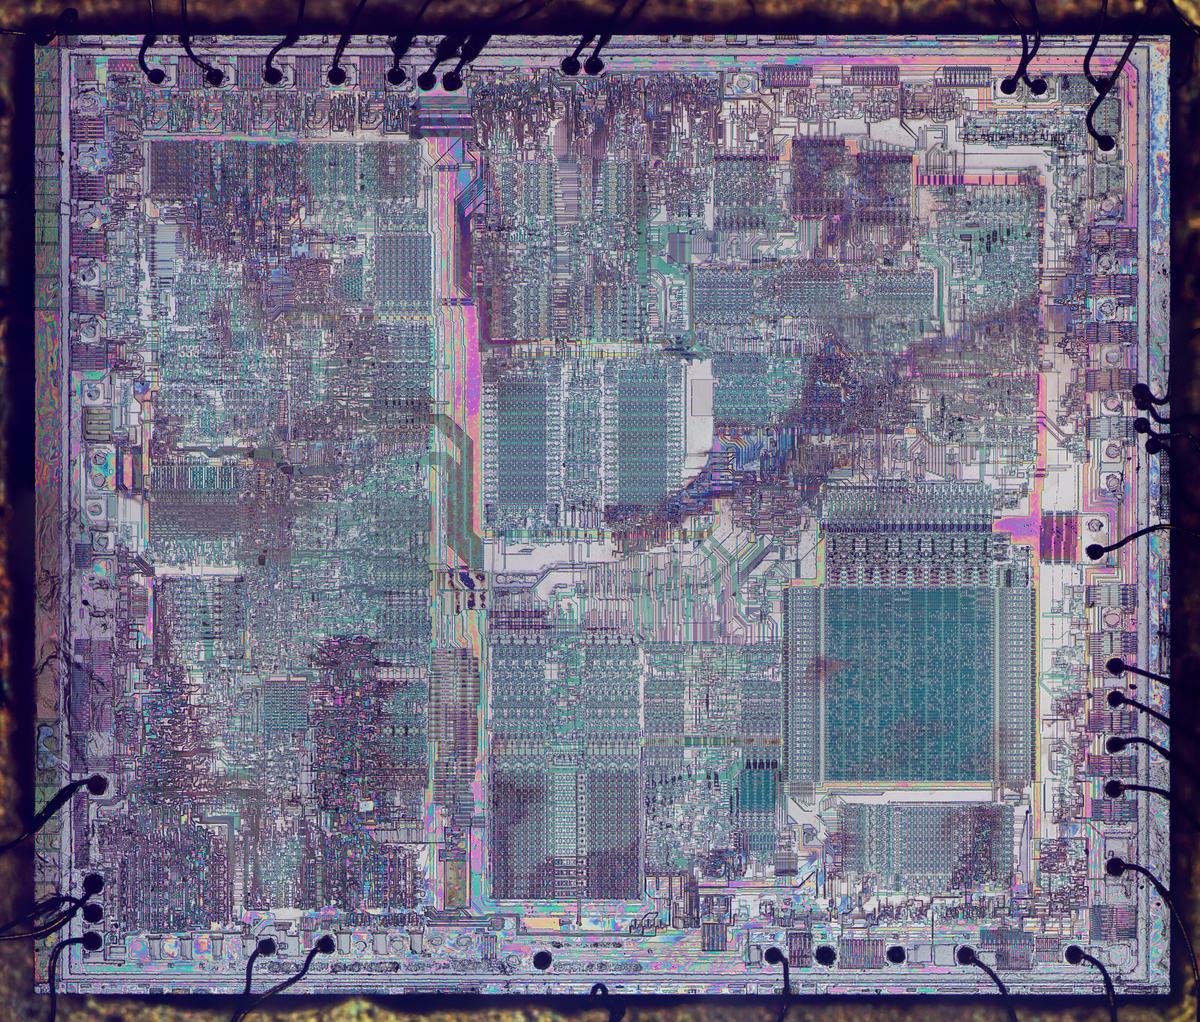 A high-resolution image of the die with the metal removed. (Click for a larger version.) Some of the oxide layer remains, causing colored regions due to thin-film interference.